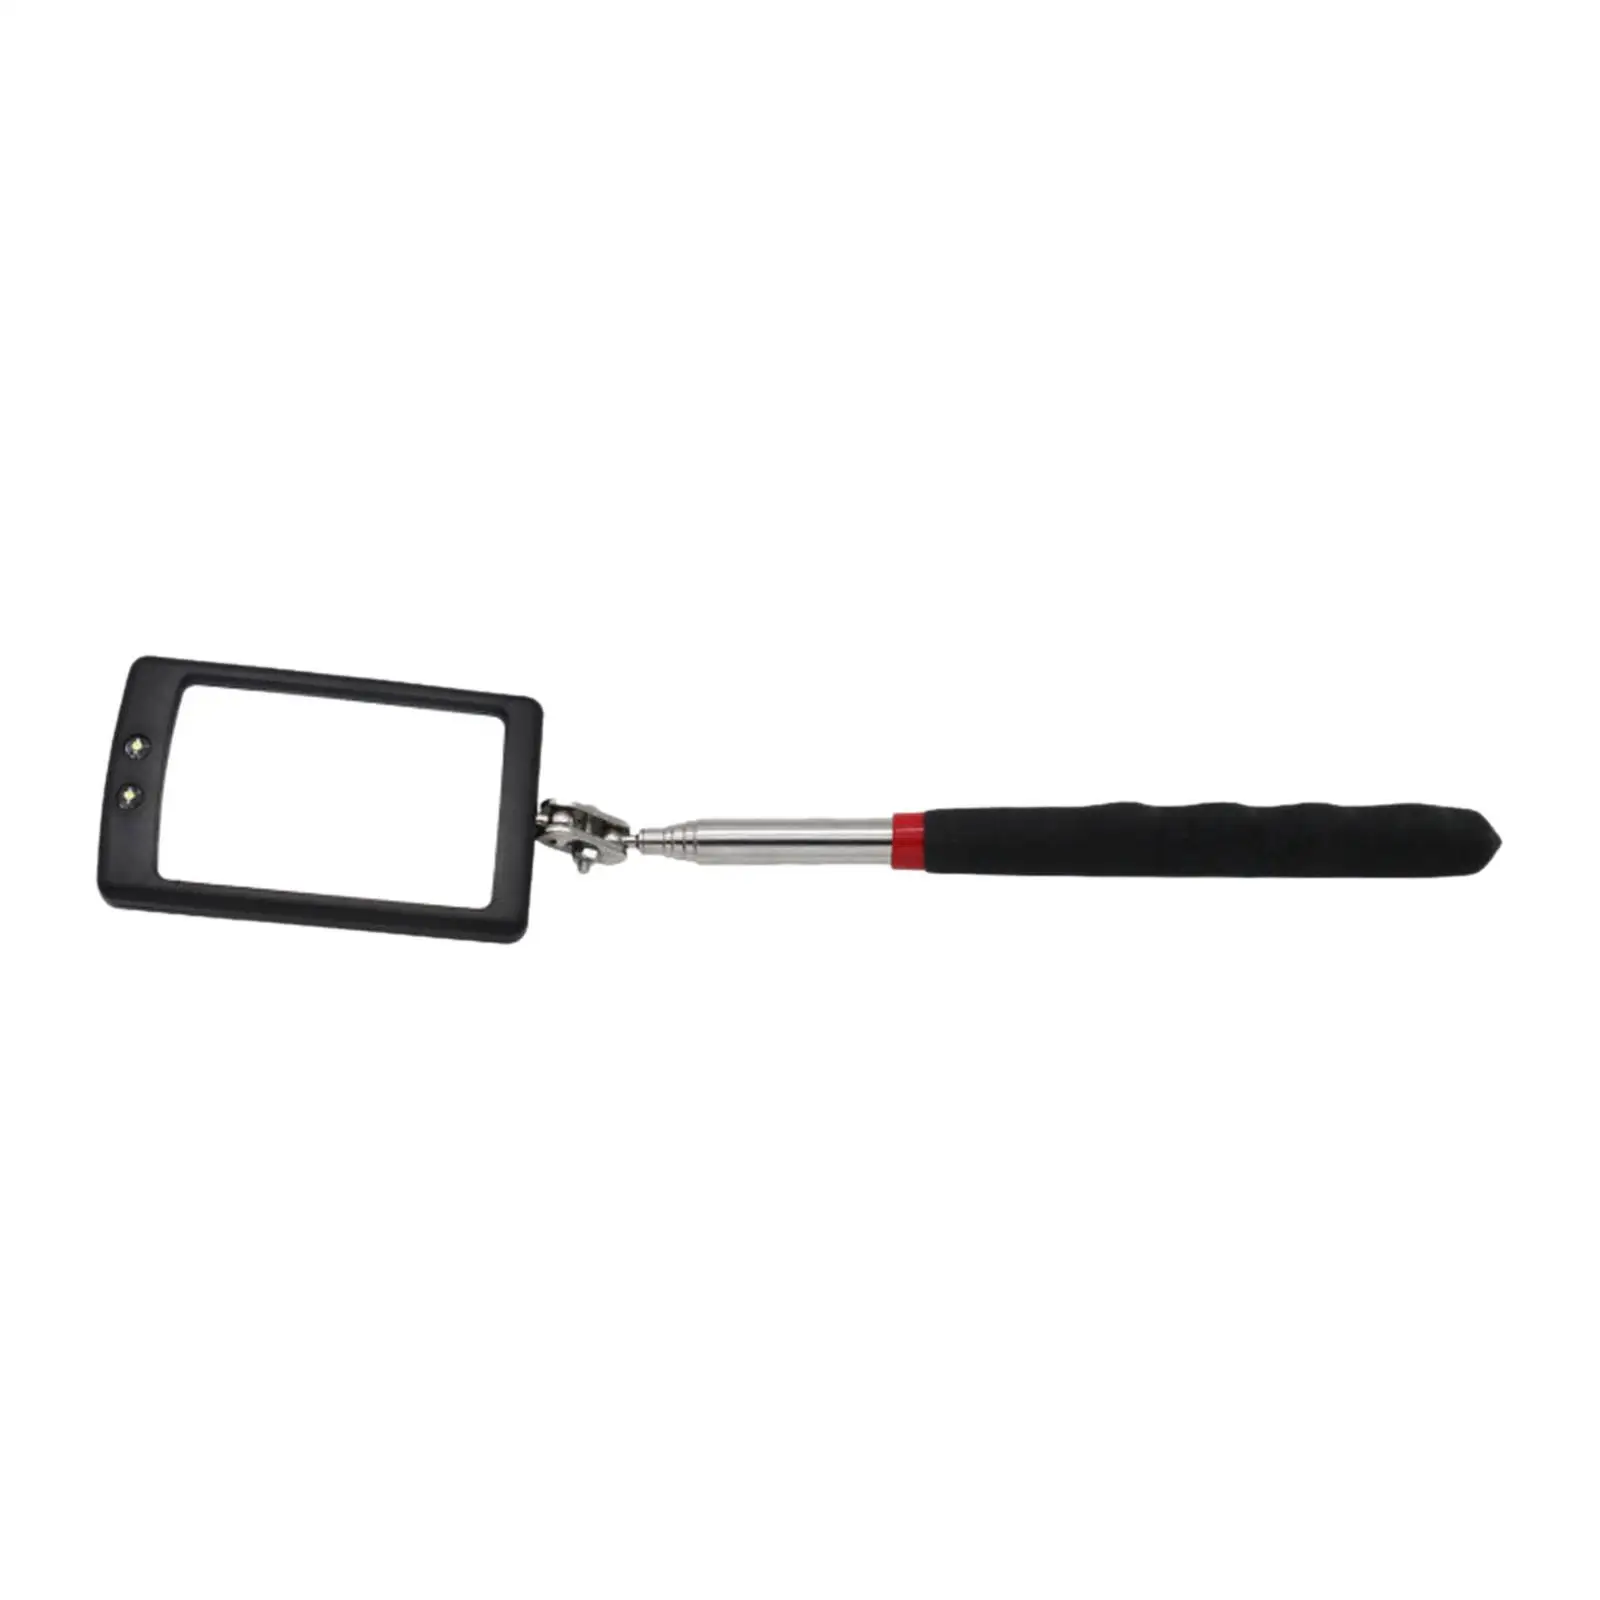 Inspection Mirror Telescoping with LED for Car Repair Home Inspector Mouth